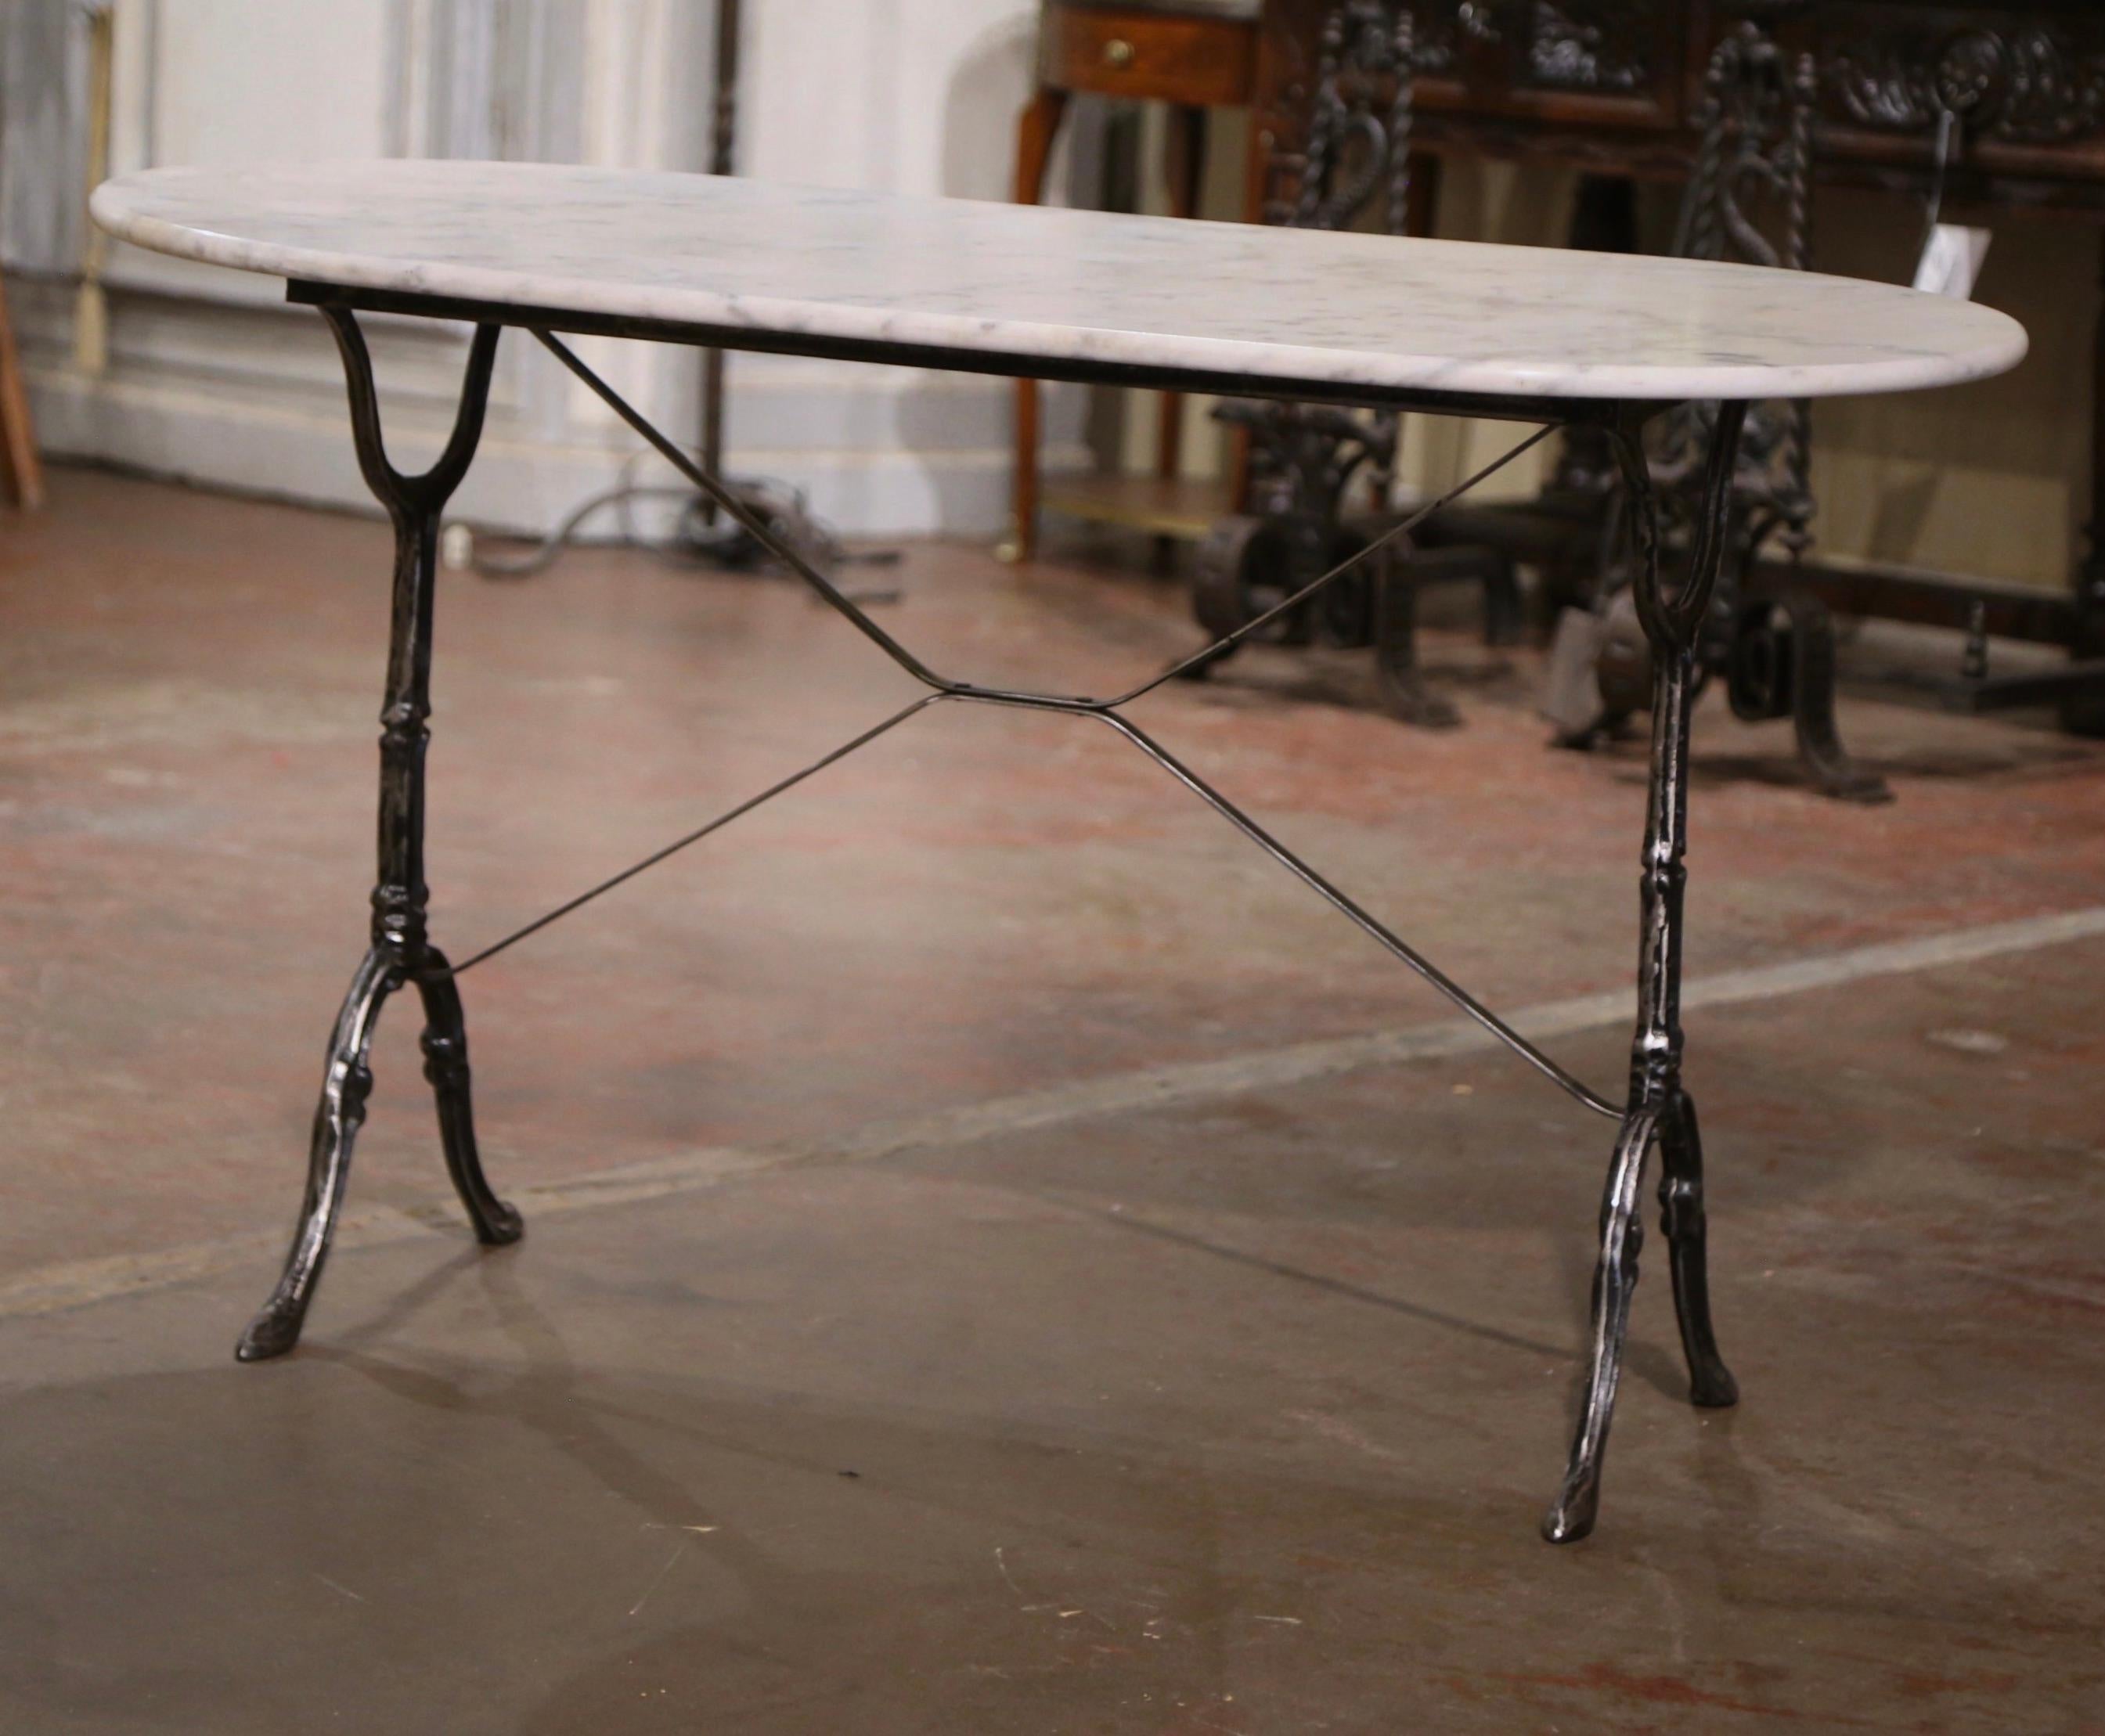 Decorate a patio or covered porch with this elegant antique bistrot table. Crafted in France circa 1960, the cast iron table sits on a trestle base with elegant scroll legs ending with hoof feet, and joined together with a double decorative crossed